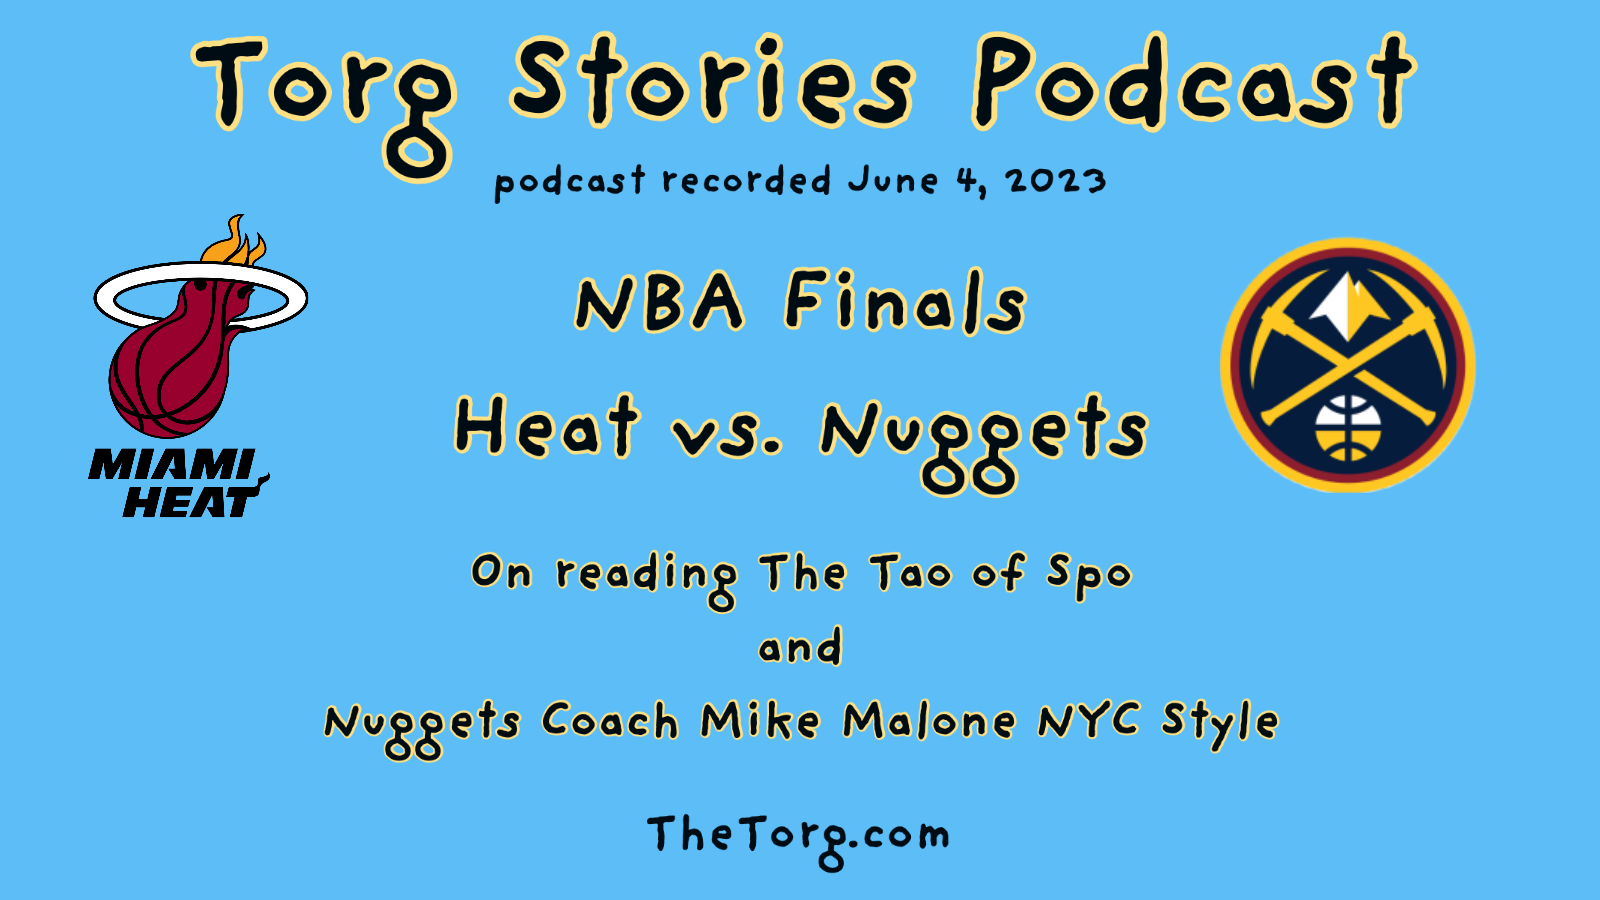 NBA Finals Nuggets and Heat, Coaches Mike Malone and Erik Spolestra,
and Two Torg Stories